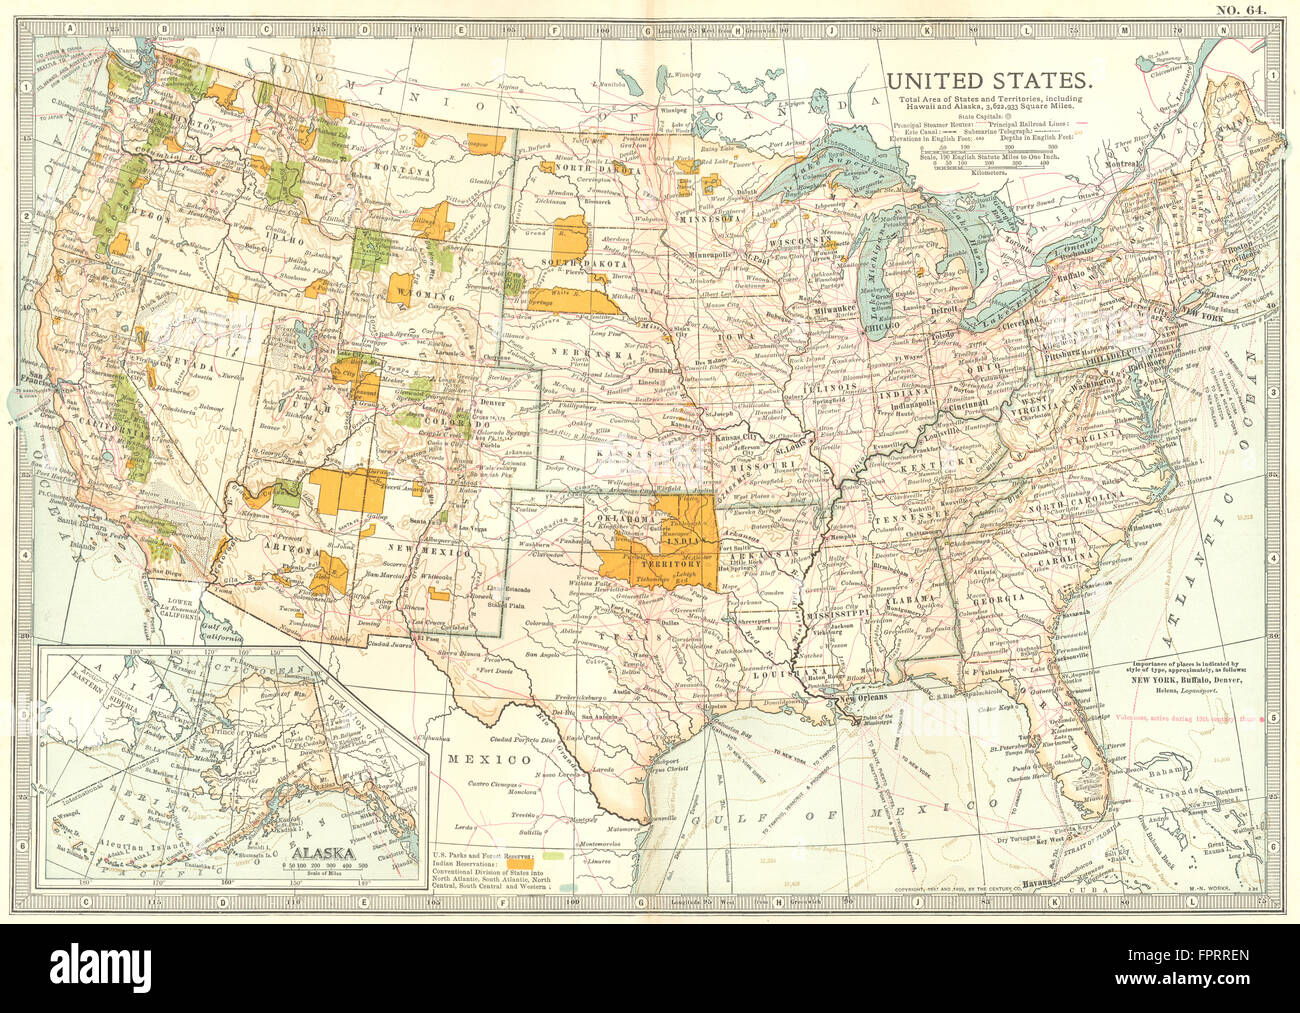 USA: United States showing Indian reserves, national park & forests, 1903 map Stock Photo